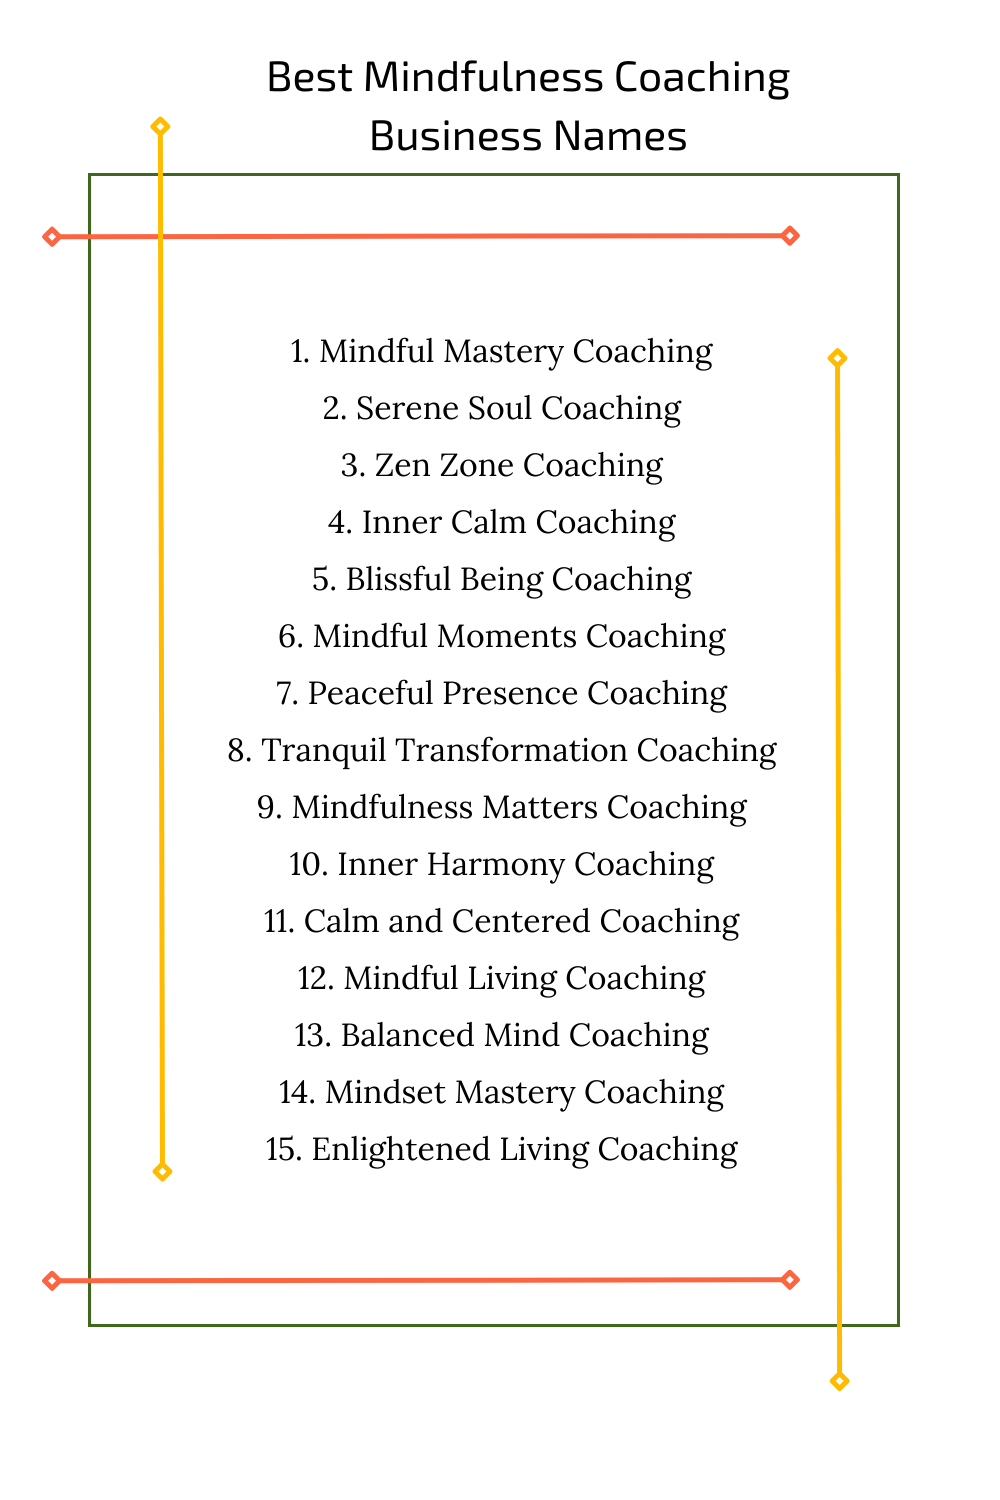 Best Mindfulness Coaching Business Names